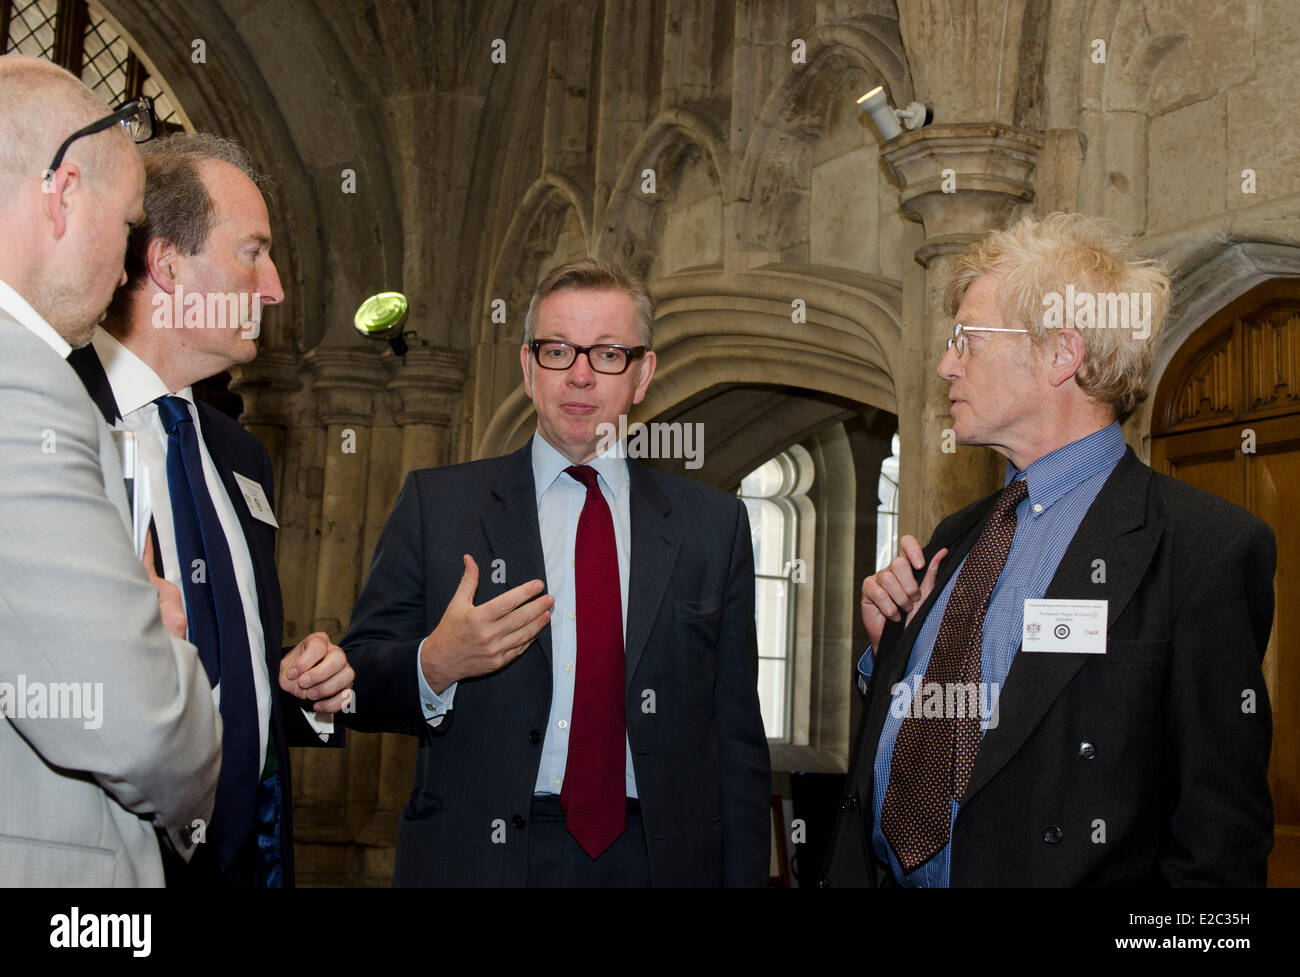 London, UK. 18th June, 2014. Toby Young, Charles Moore, Michael Gove, Roger Scruton  at the Margaret Thatcher Conference on Liberty 2014, Guildhall, London, UK Credit:  Prixnews/Alamy Live News Stock Photo